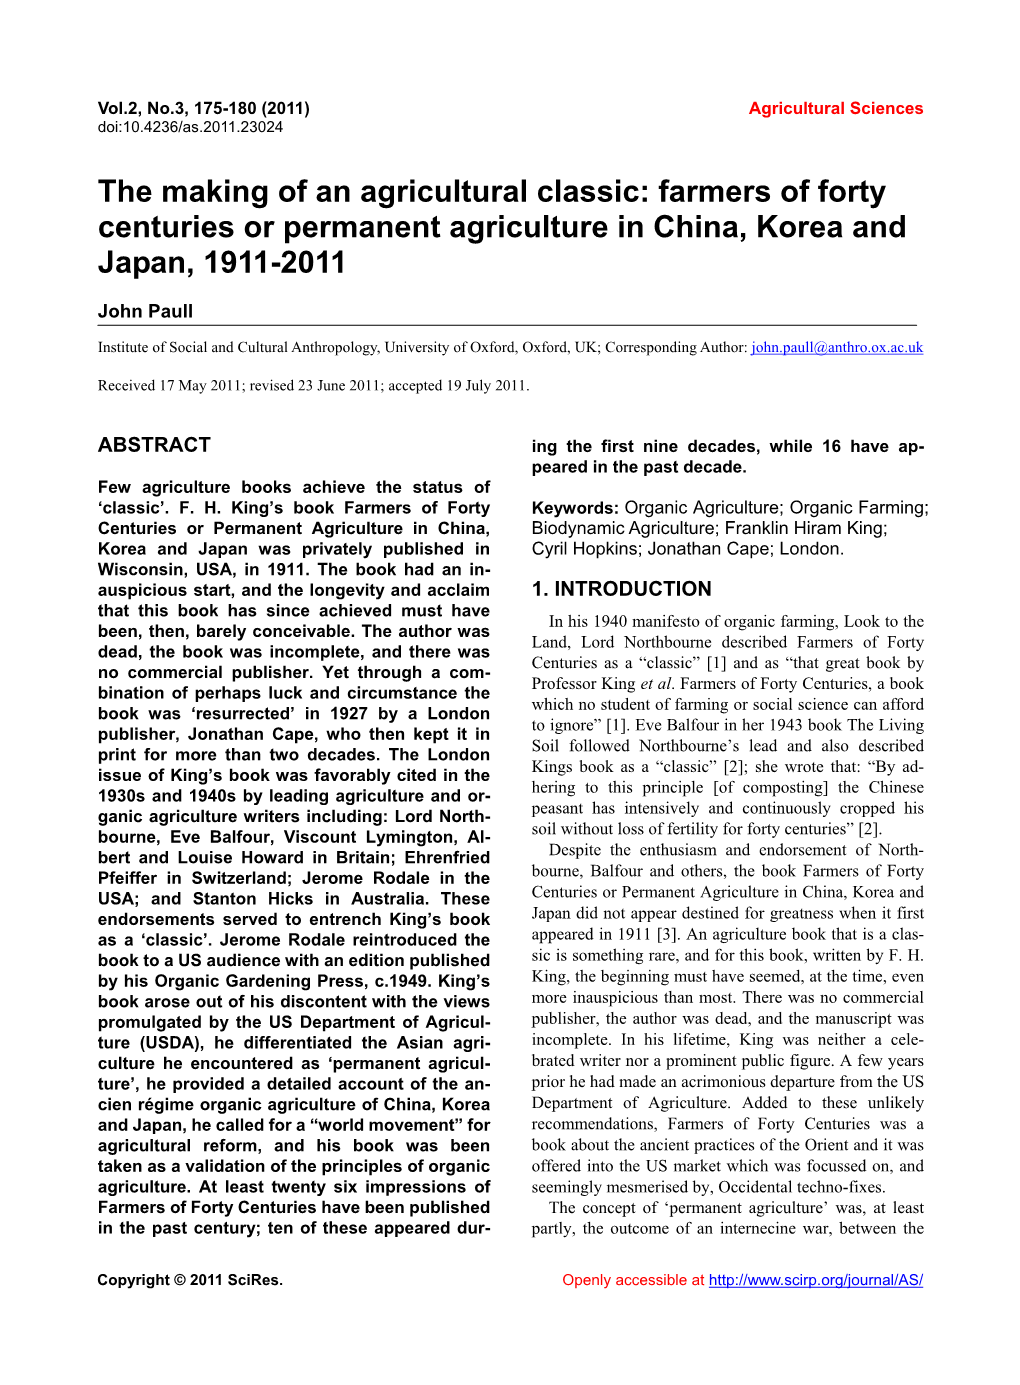 Farmers of Forty Centuries Or Permanent Agriculture in China, Korea and Japan, 1911-2011